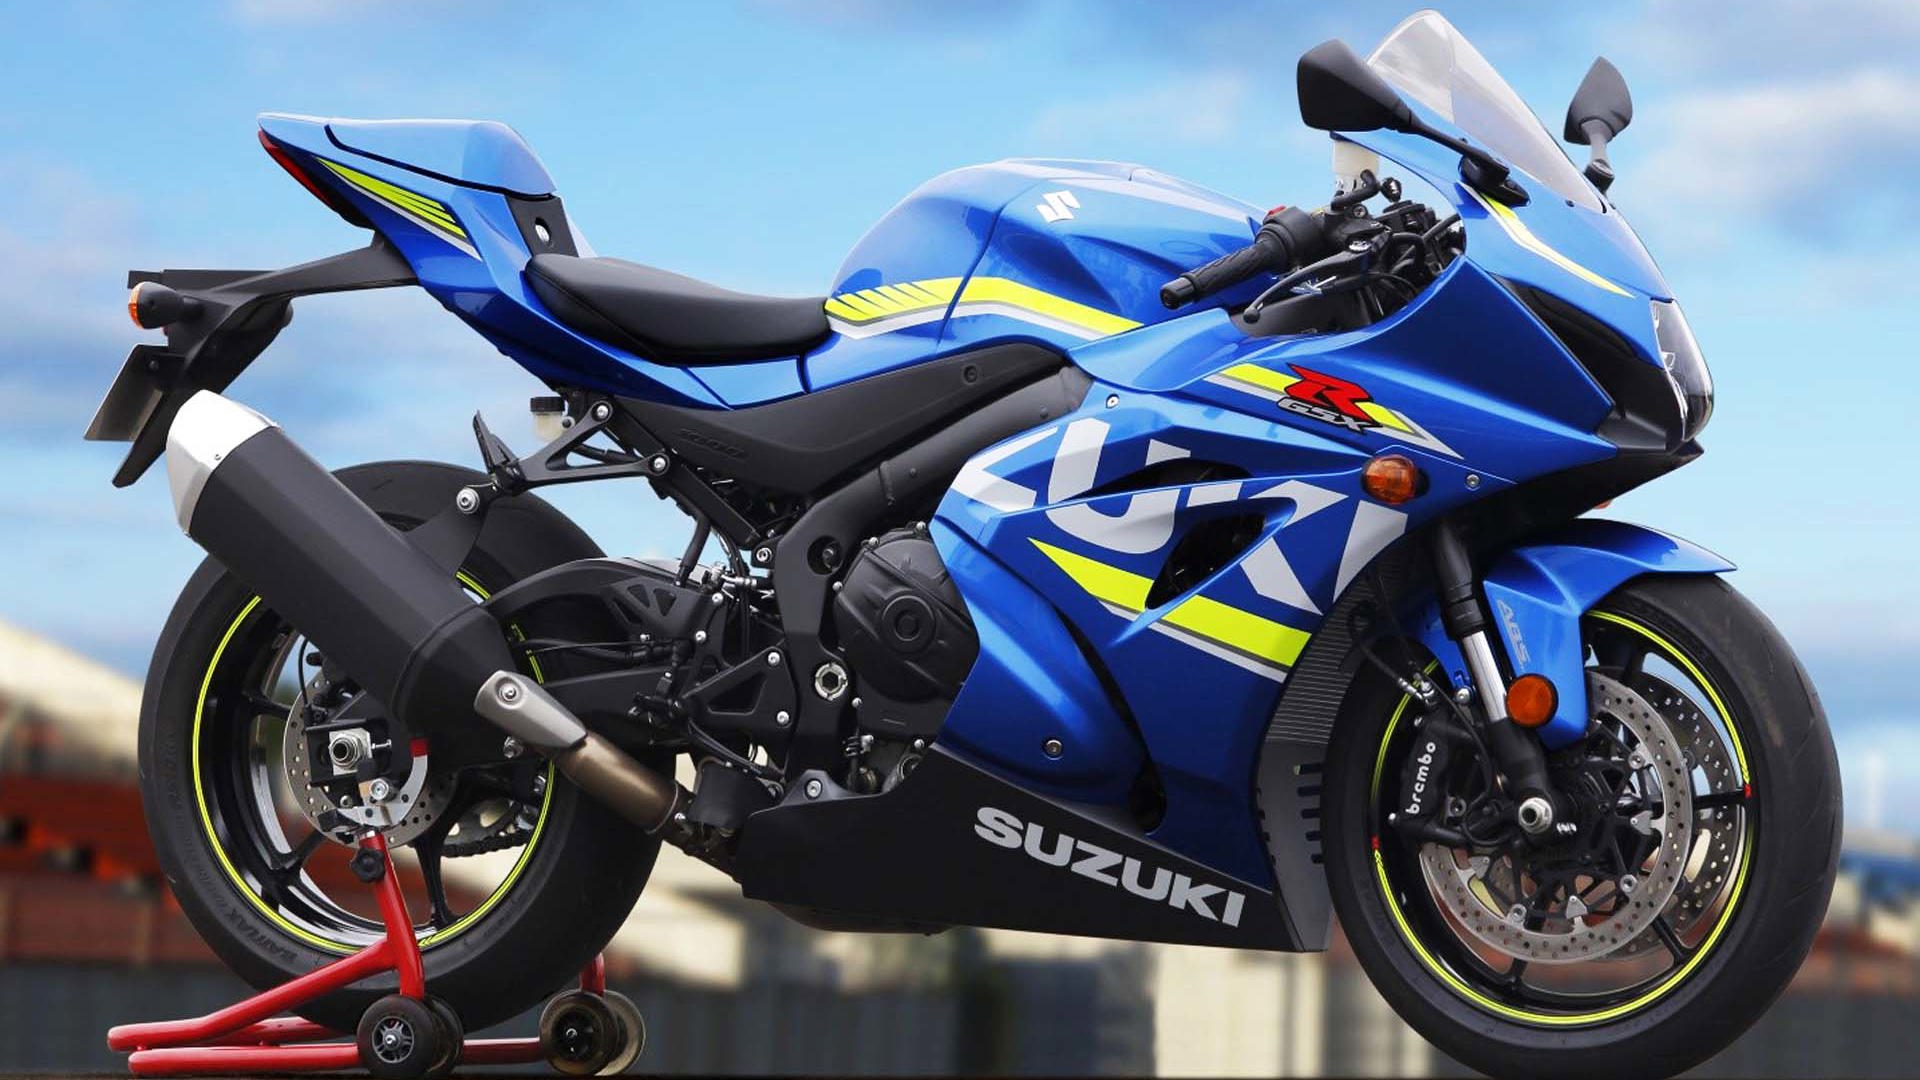 Suzuki’s iconic GSX-R1000 gets a big upgrade late in 2016 for the 2017 model year. The newest iteration will have a variable valve timing-equipped 999cc engine good for around 200 hp, with a ten-stage traction control system. However, it won’t have an inertia measurement unit <em>a la</em> the Yamaha YZF-R1 or the Ducati 1299 Panigale, which means a less electronics-heavy riding experience. Showa Balance Free Forks with a remote damping valve and similarly setup rear shock should improve ride comfort at low speed and grip at high speed.